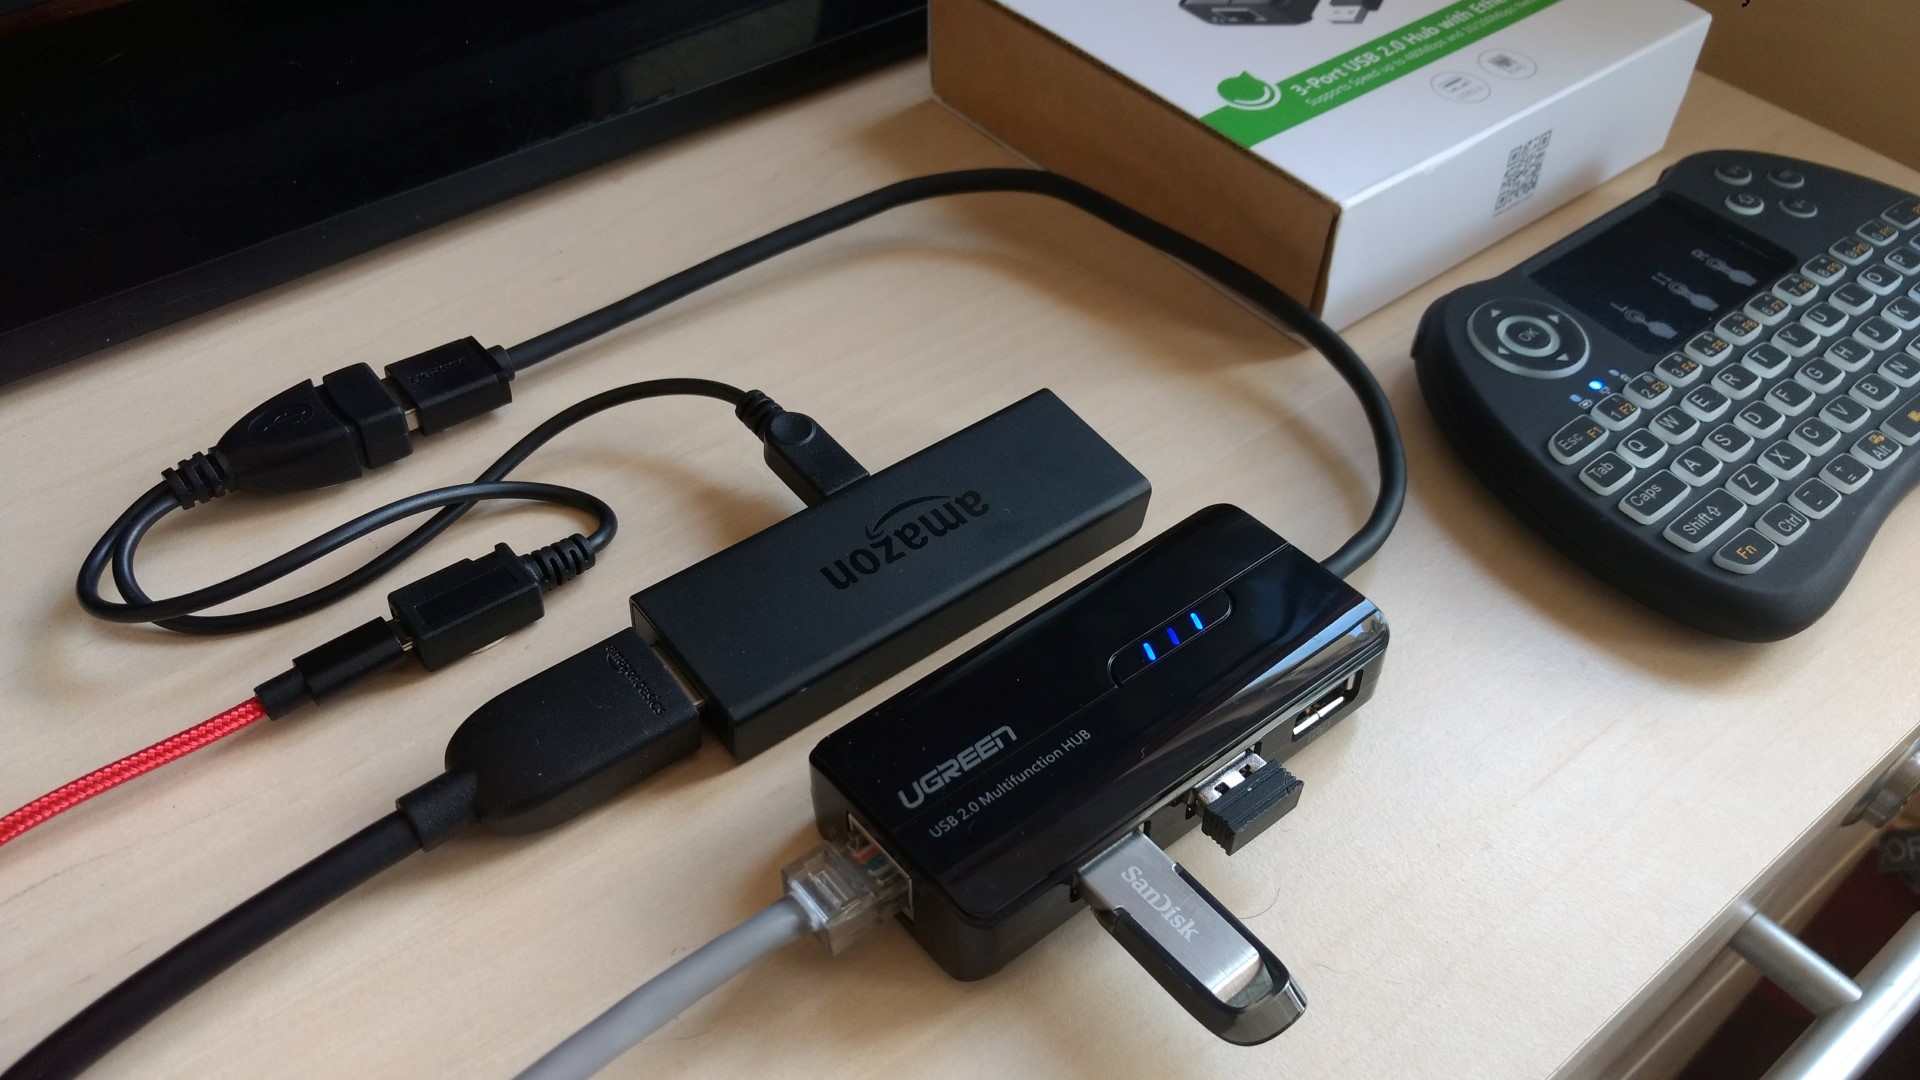 Liewenthal usb devices driver adapter